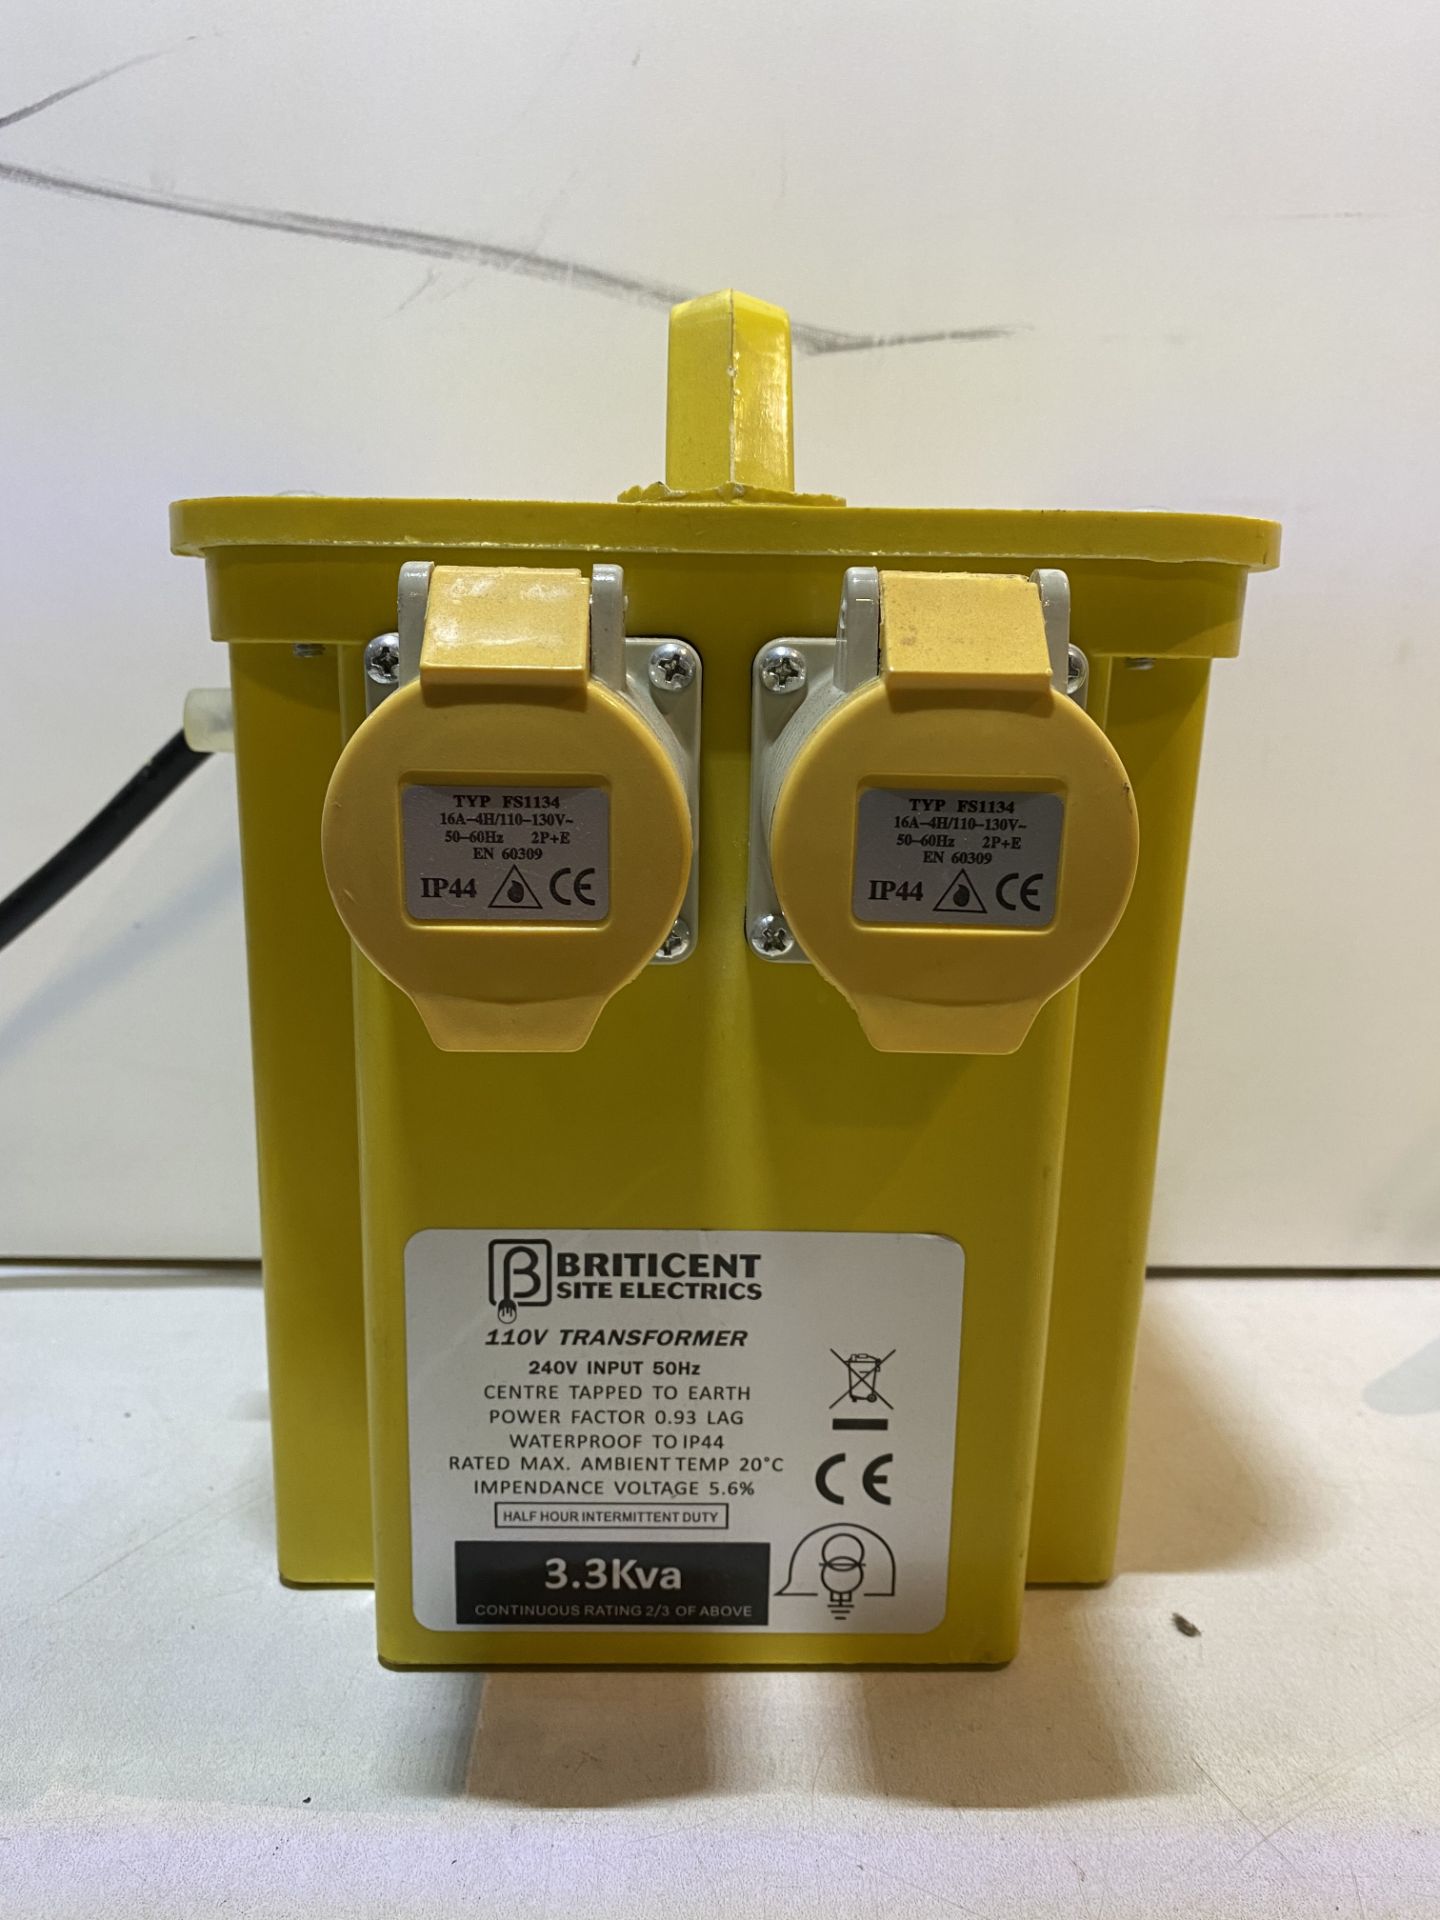 2 x Briticent 110v Transformers, 240v Input - See Pictures - Image 2 of 4